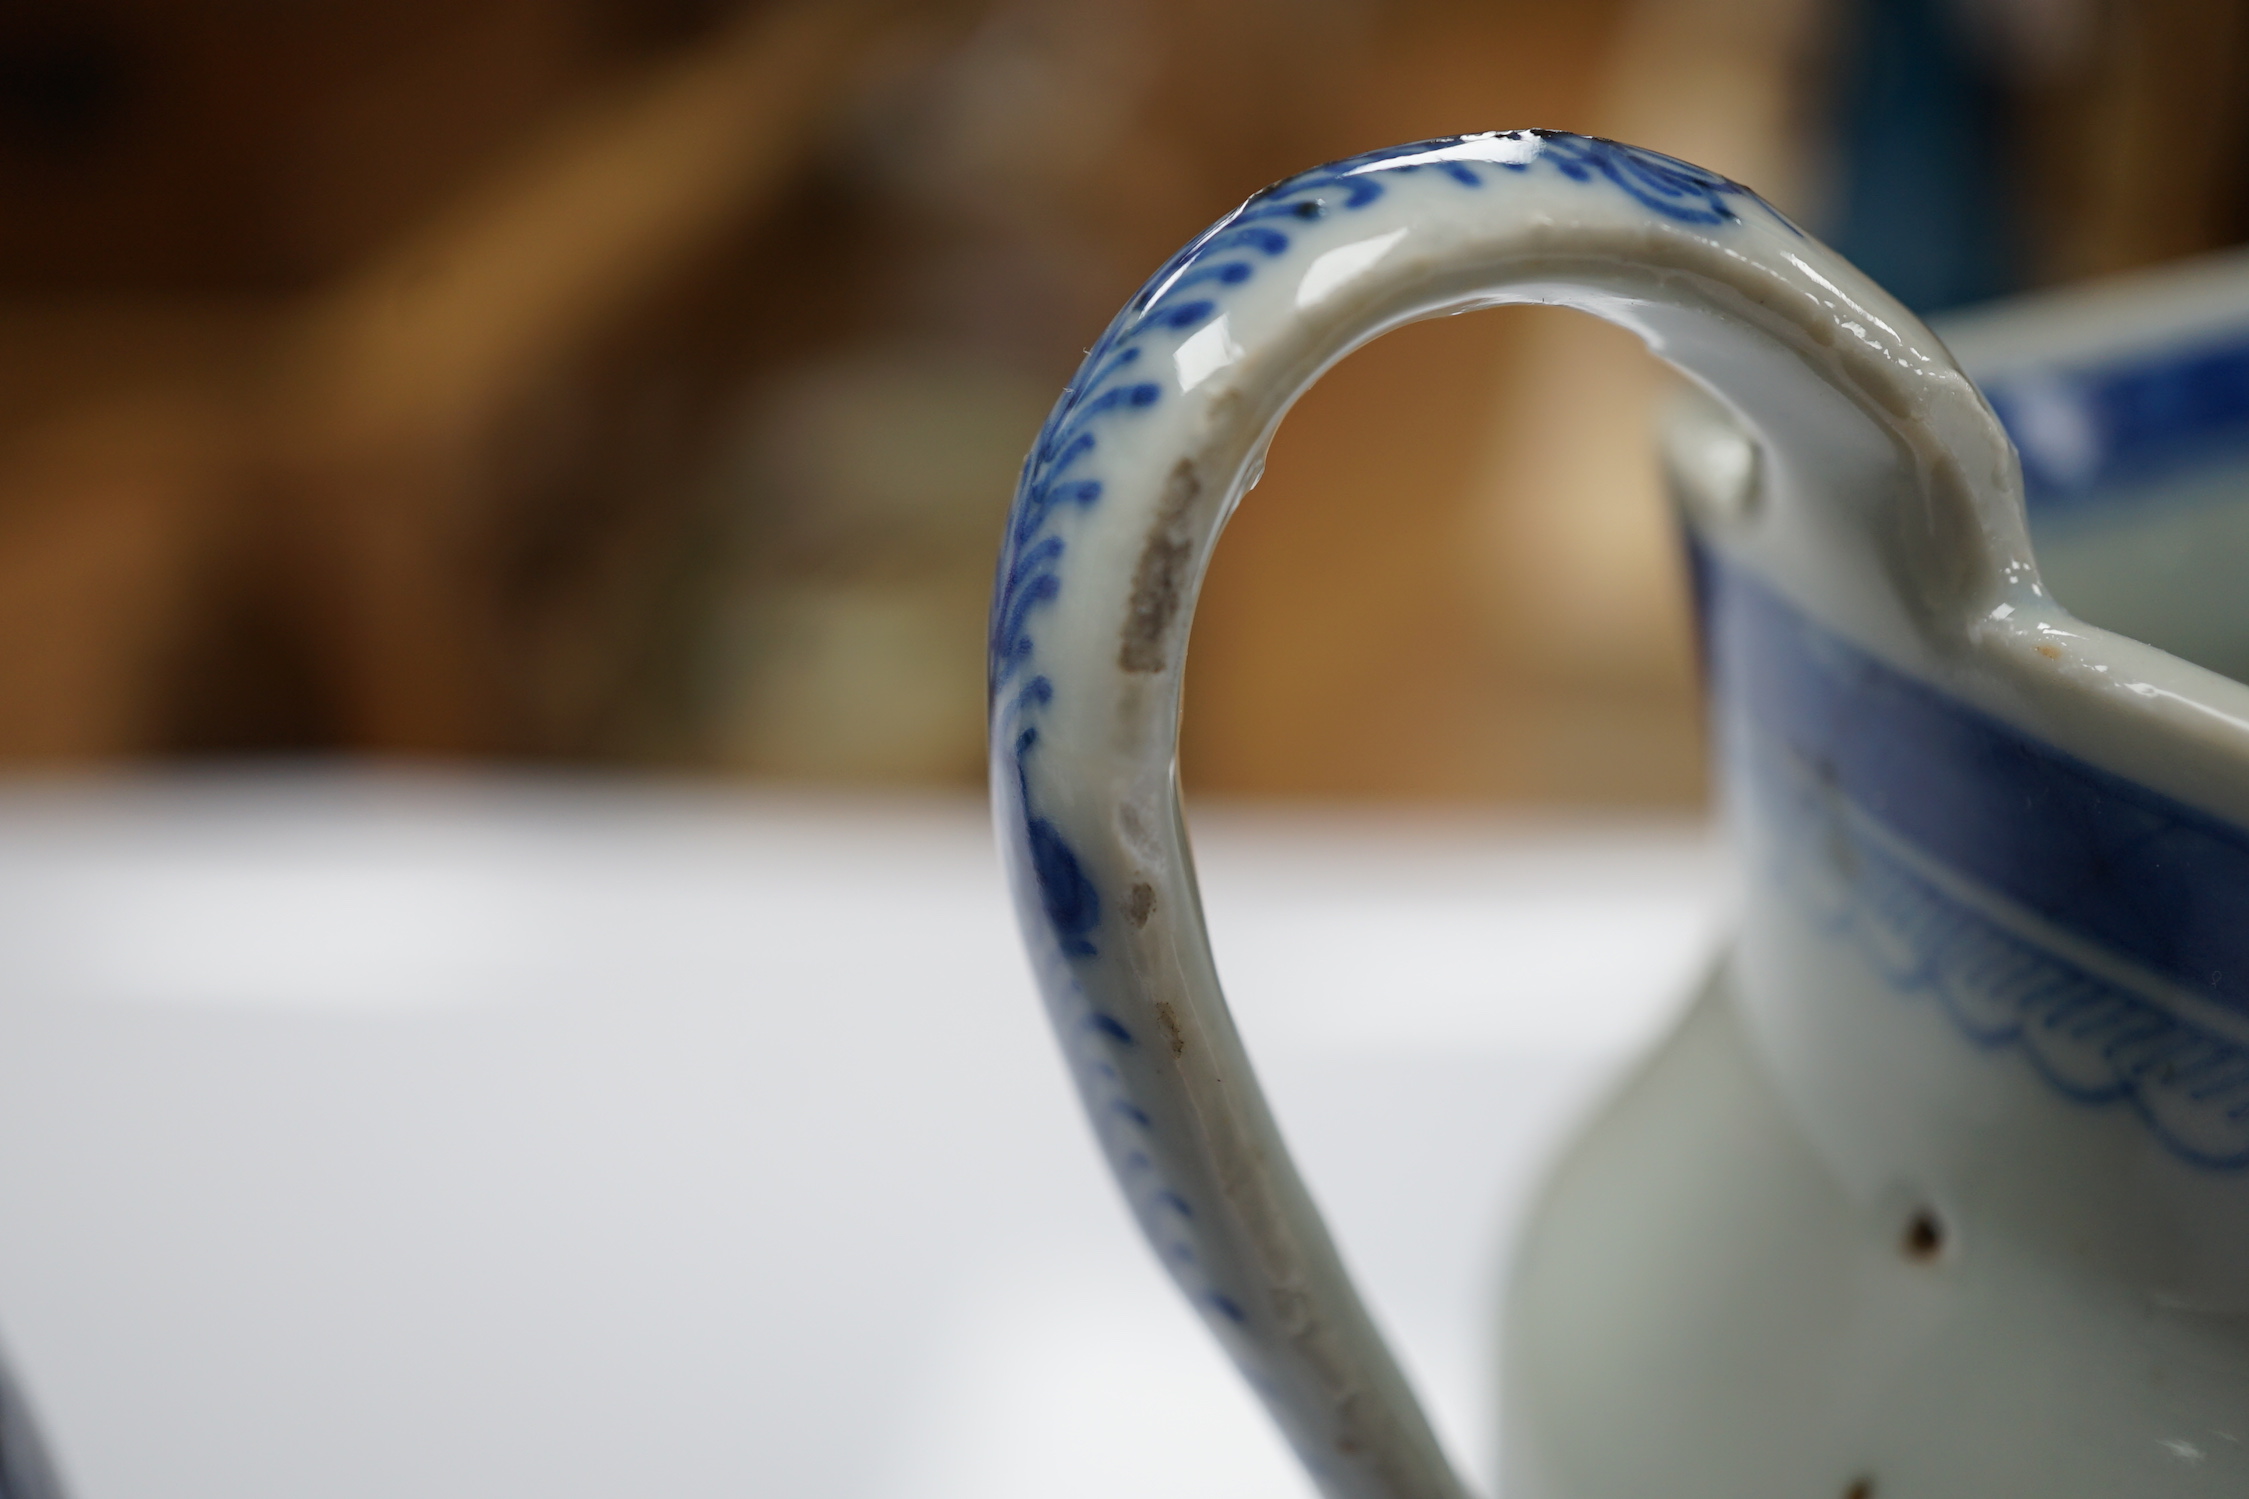 A 19th century Chinese blue and white jug, a similar jar and a pierced jar, tallest 15cm